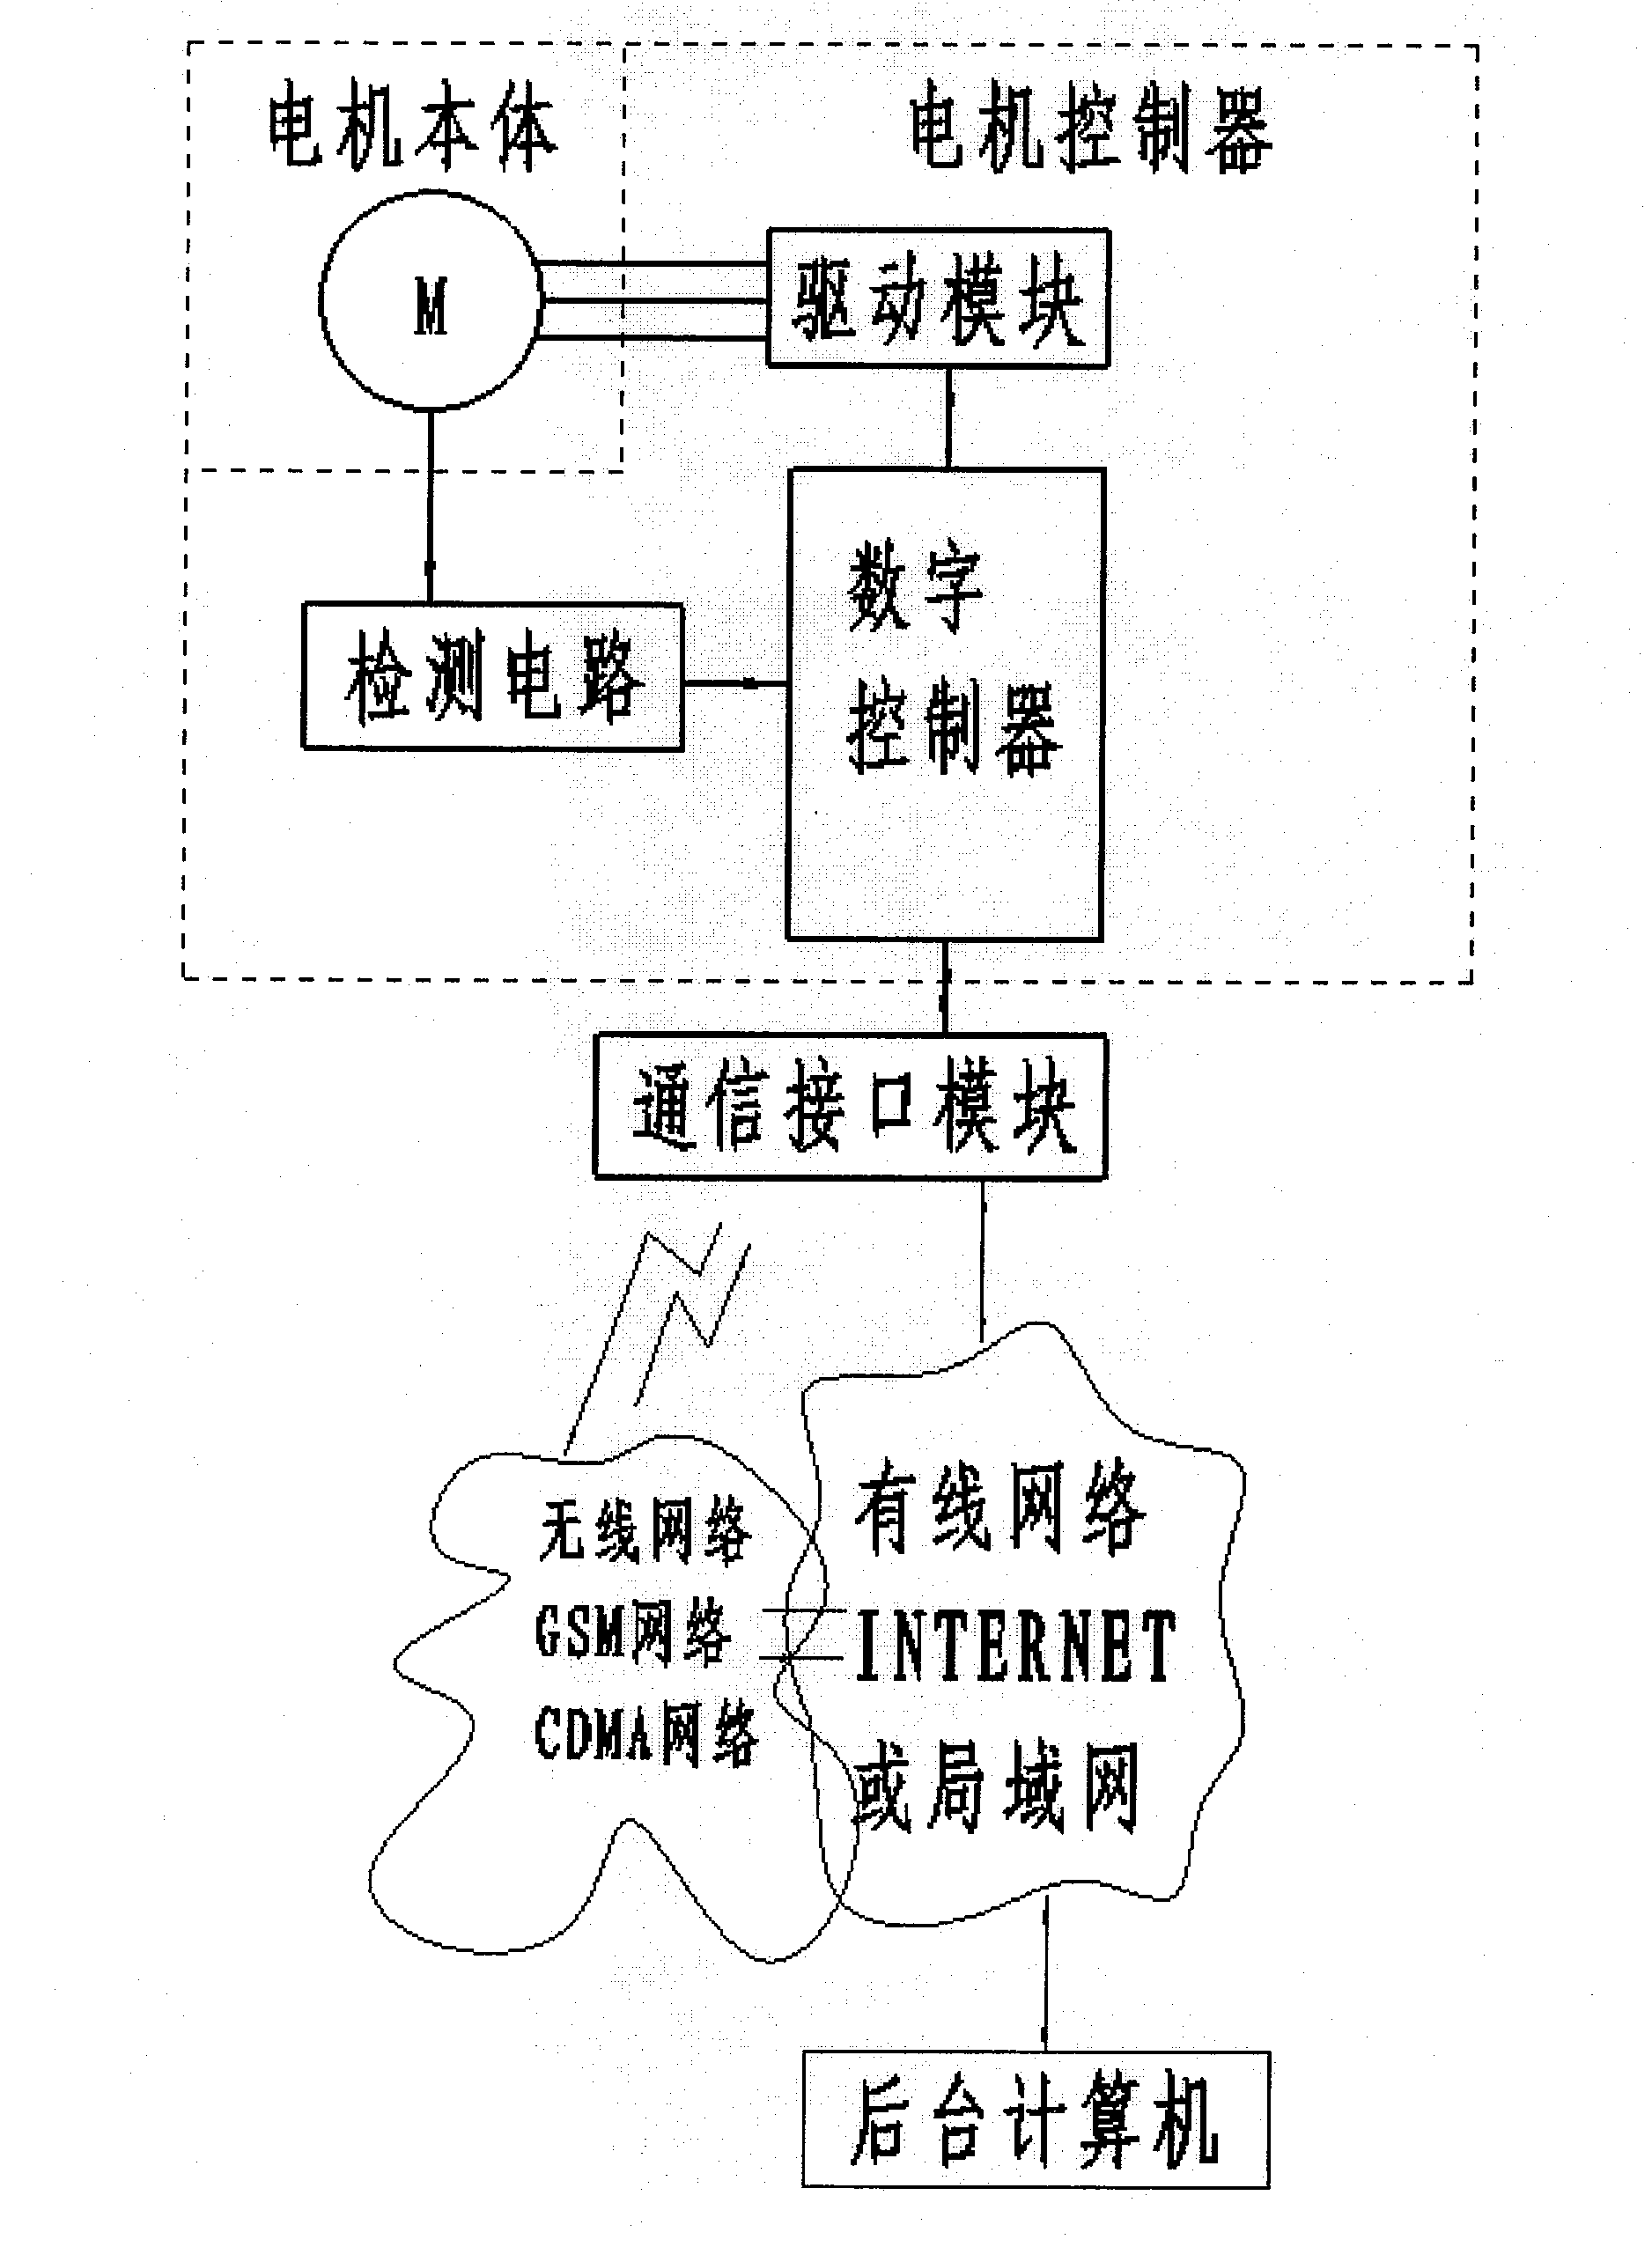 Network motors and acquisition and diagnostic system for fault remote data thereof